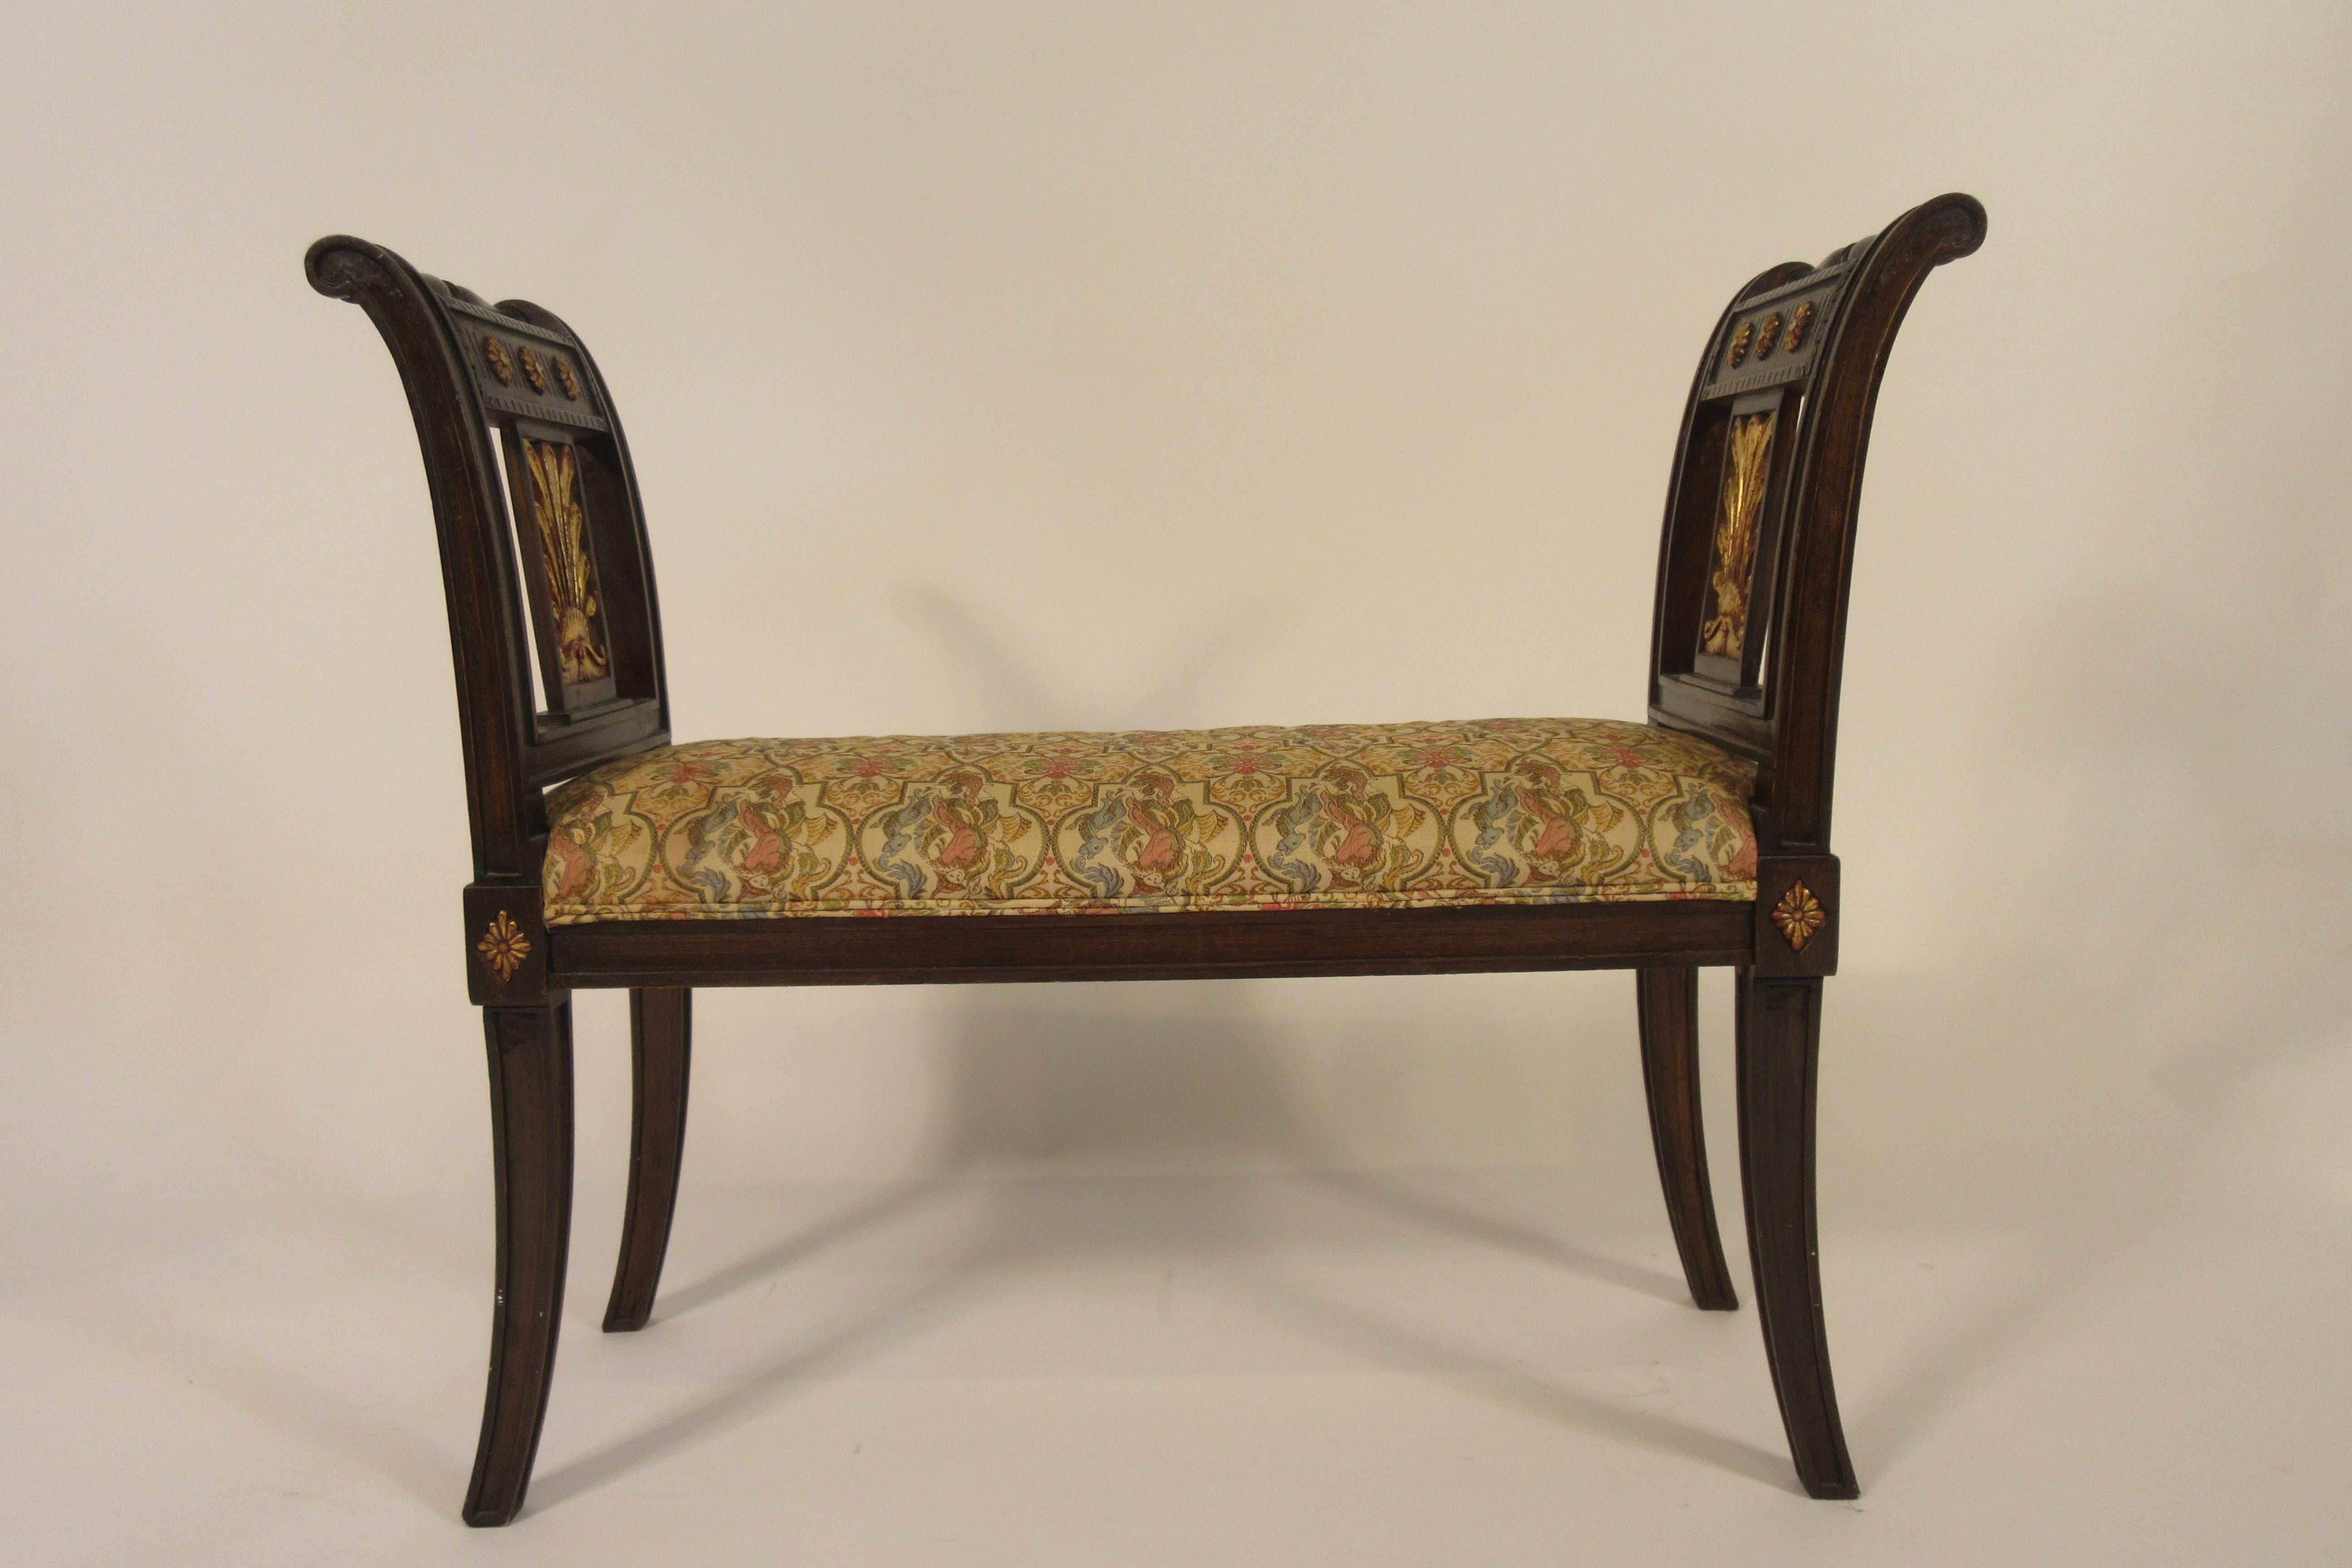 Carved wood classical bench with gilt accents.